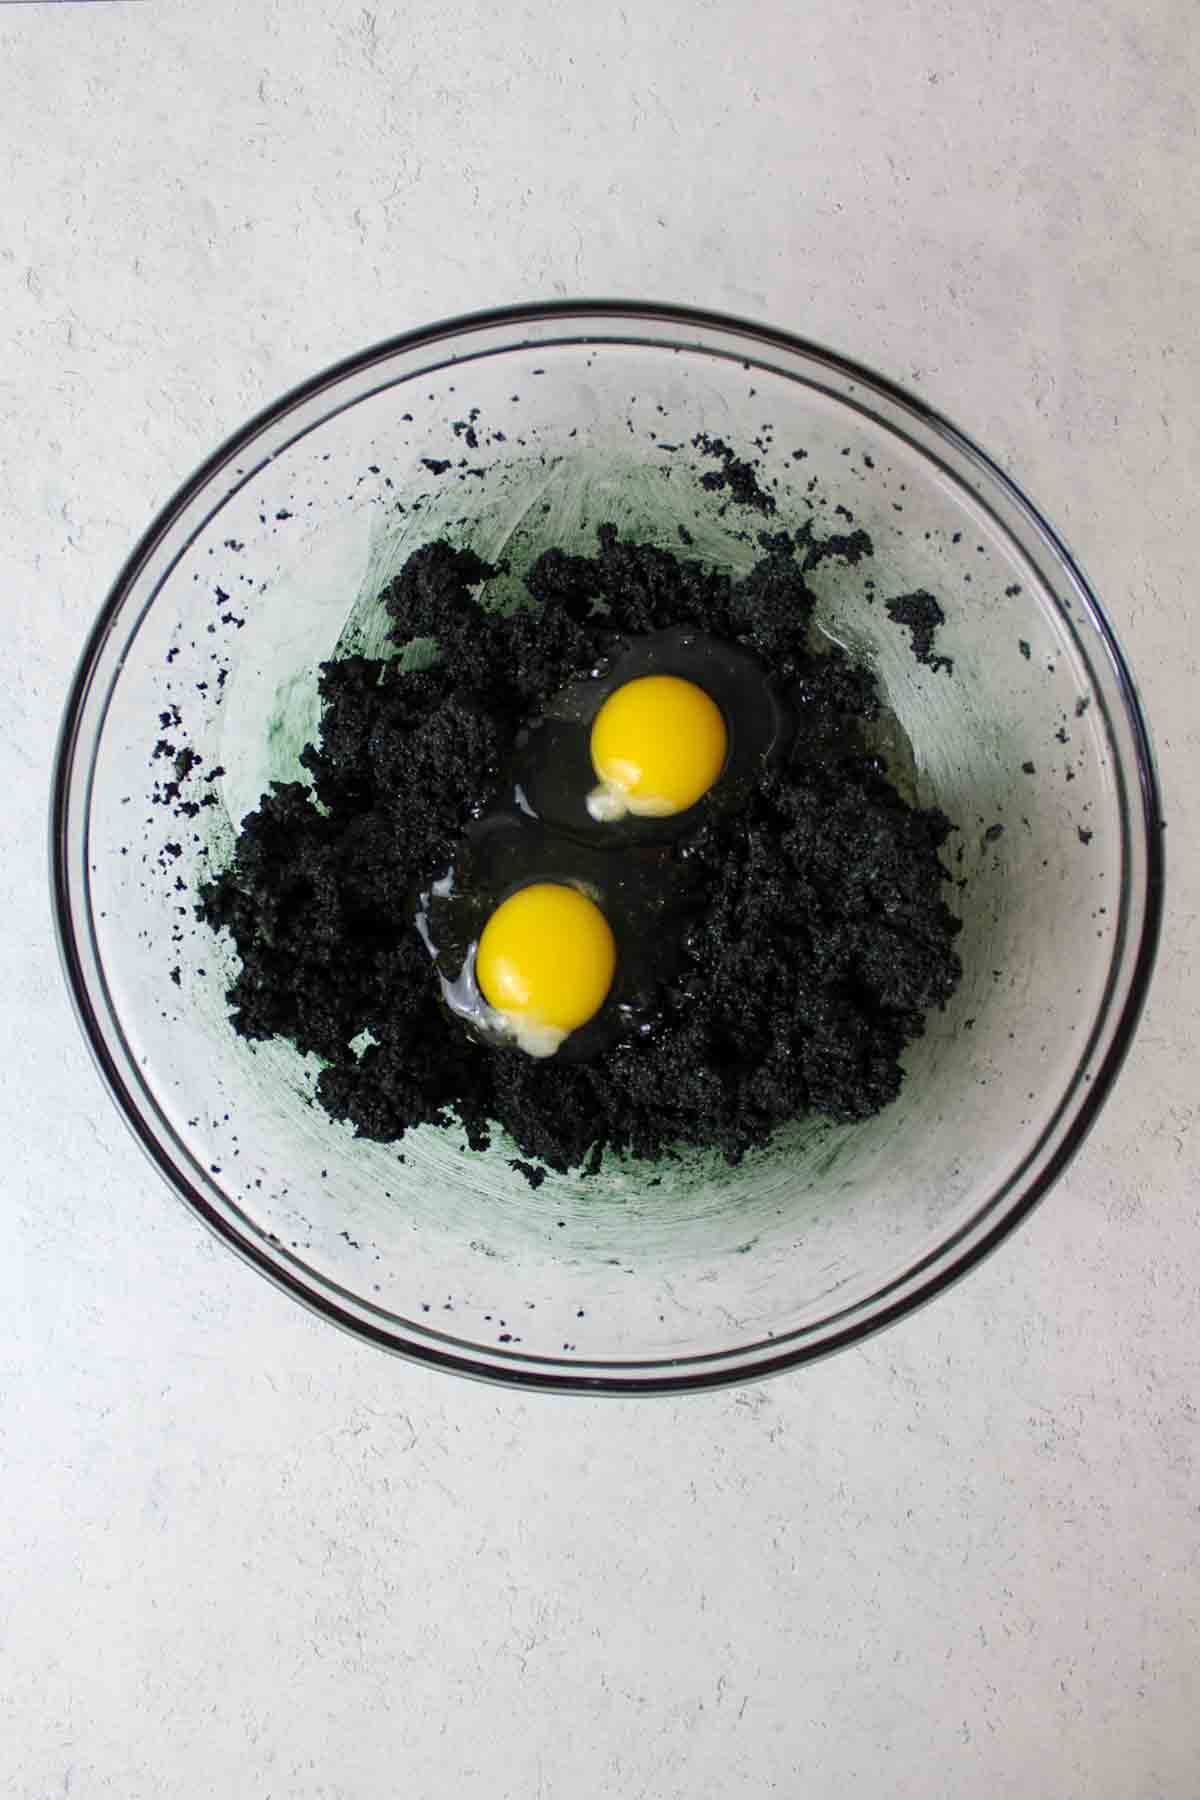 two eggs added to the black butter and sugar mixture